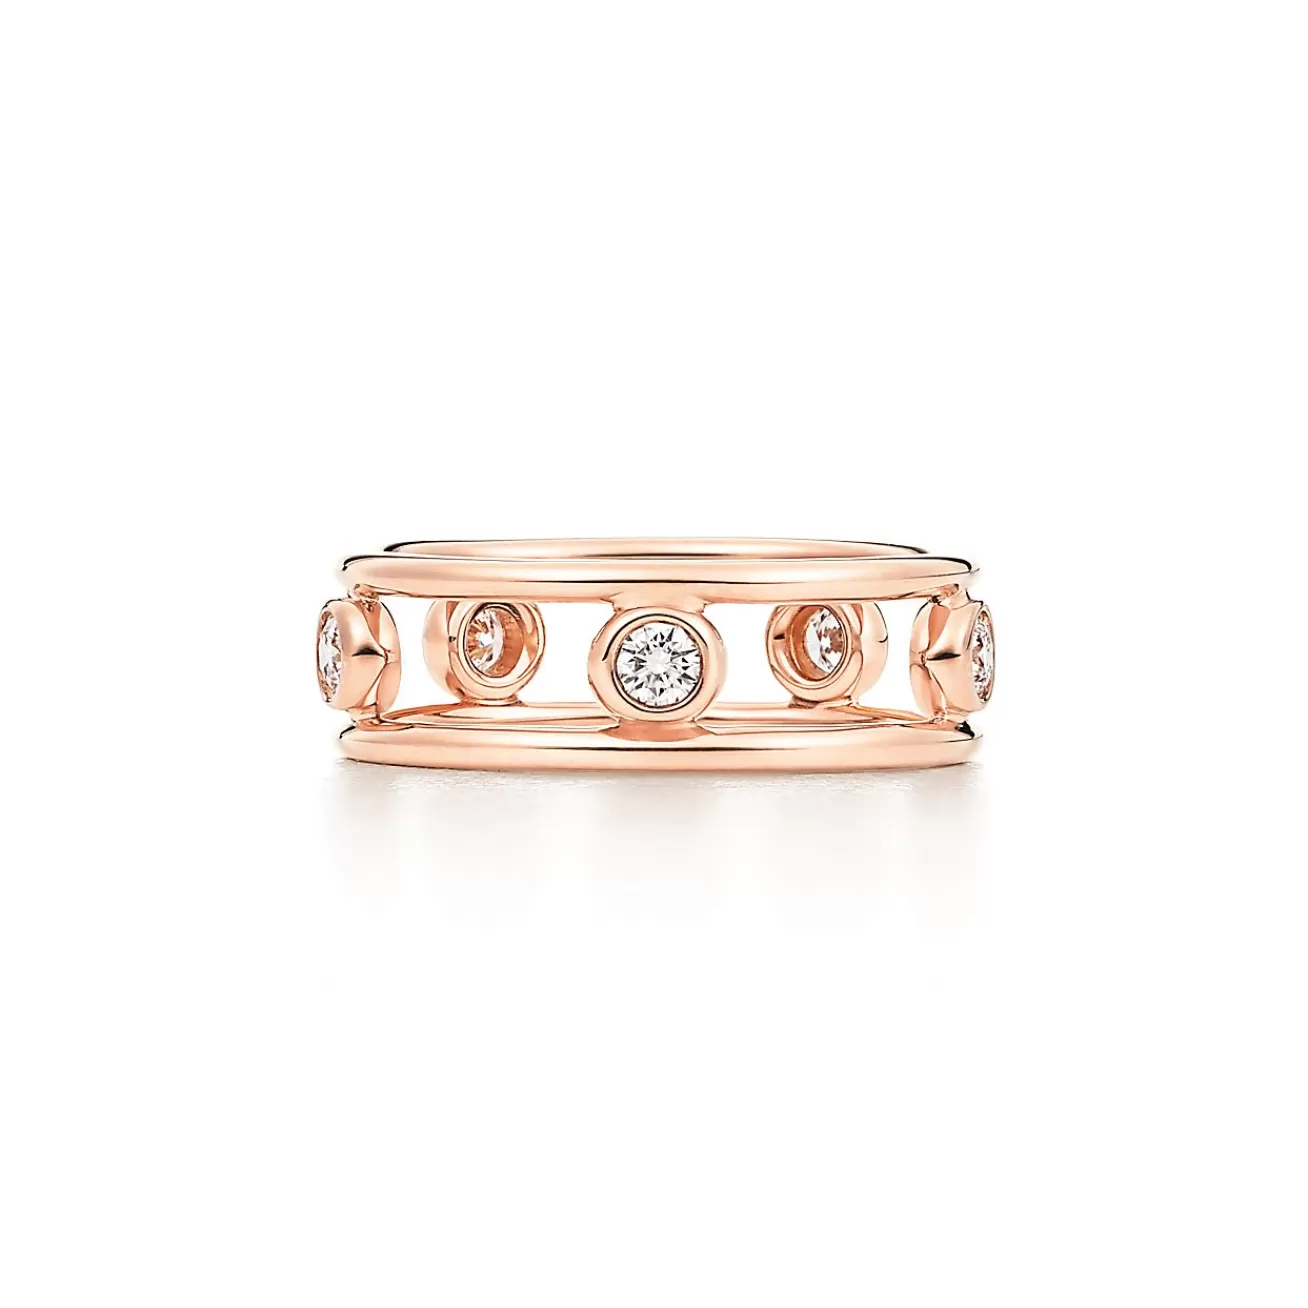 Tiffany & Co. Elsa Peretti® Diamonds by the Yard® ring in 18k rose gold with diamonds. | ^ Rings | Rose Gold Jewelry